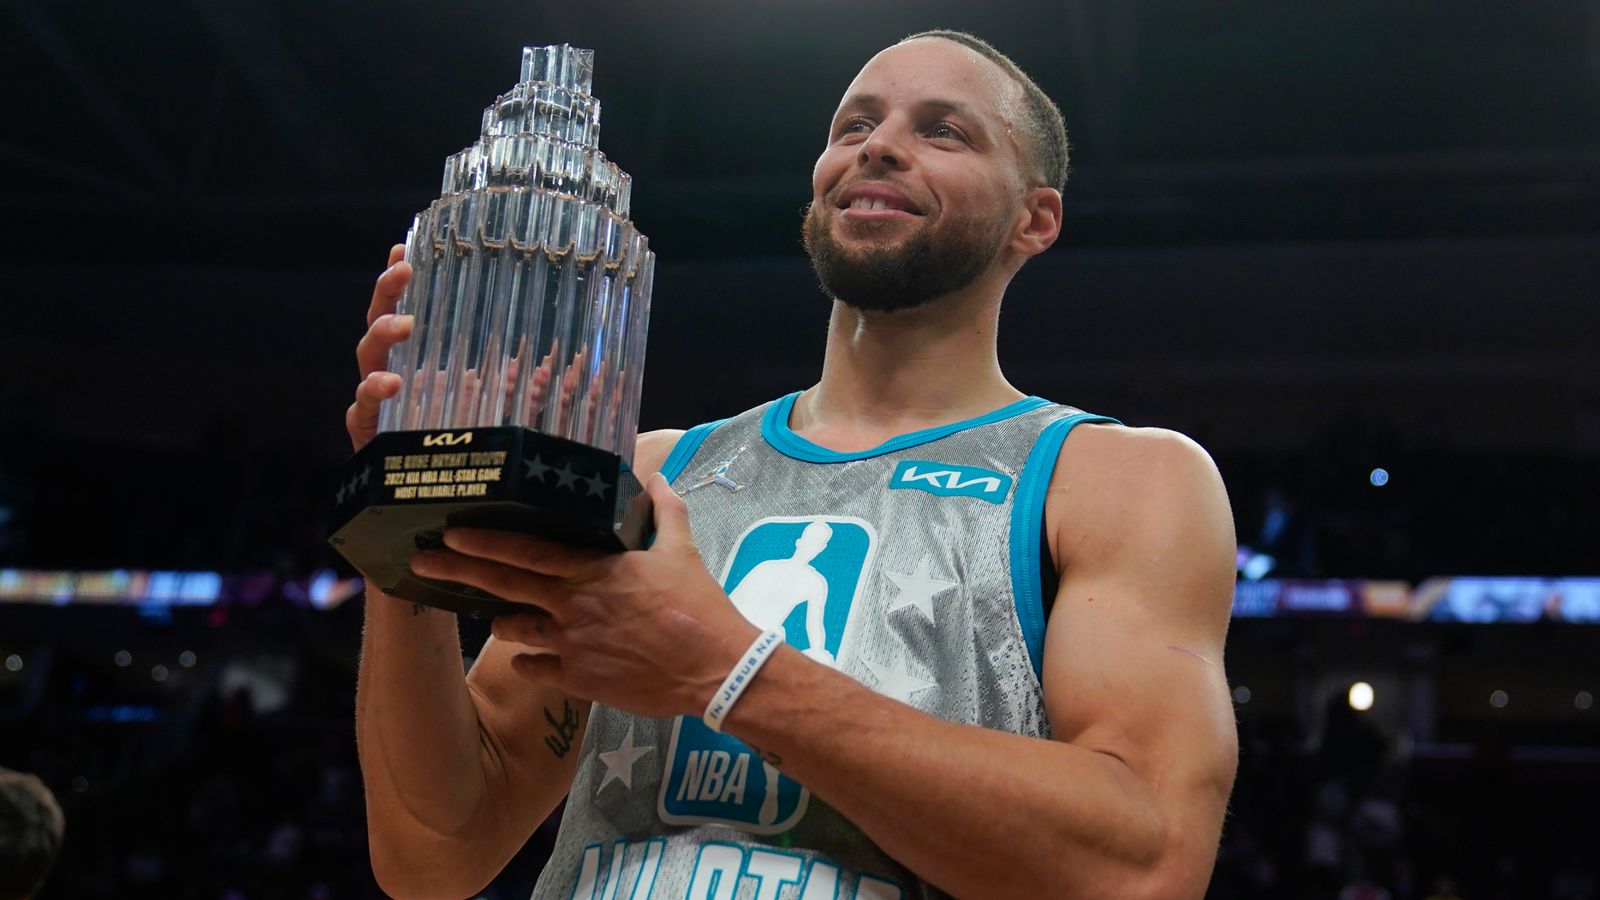 Stephen Curry wins AllStar MVP award with recordbreaking performance